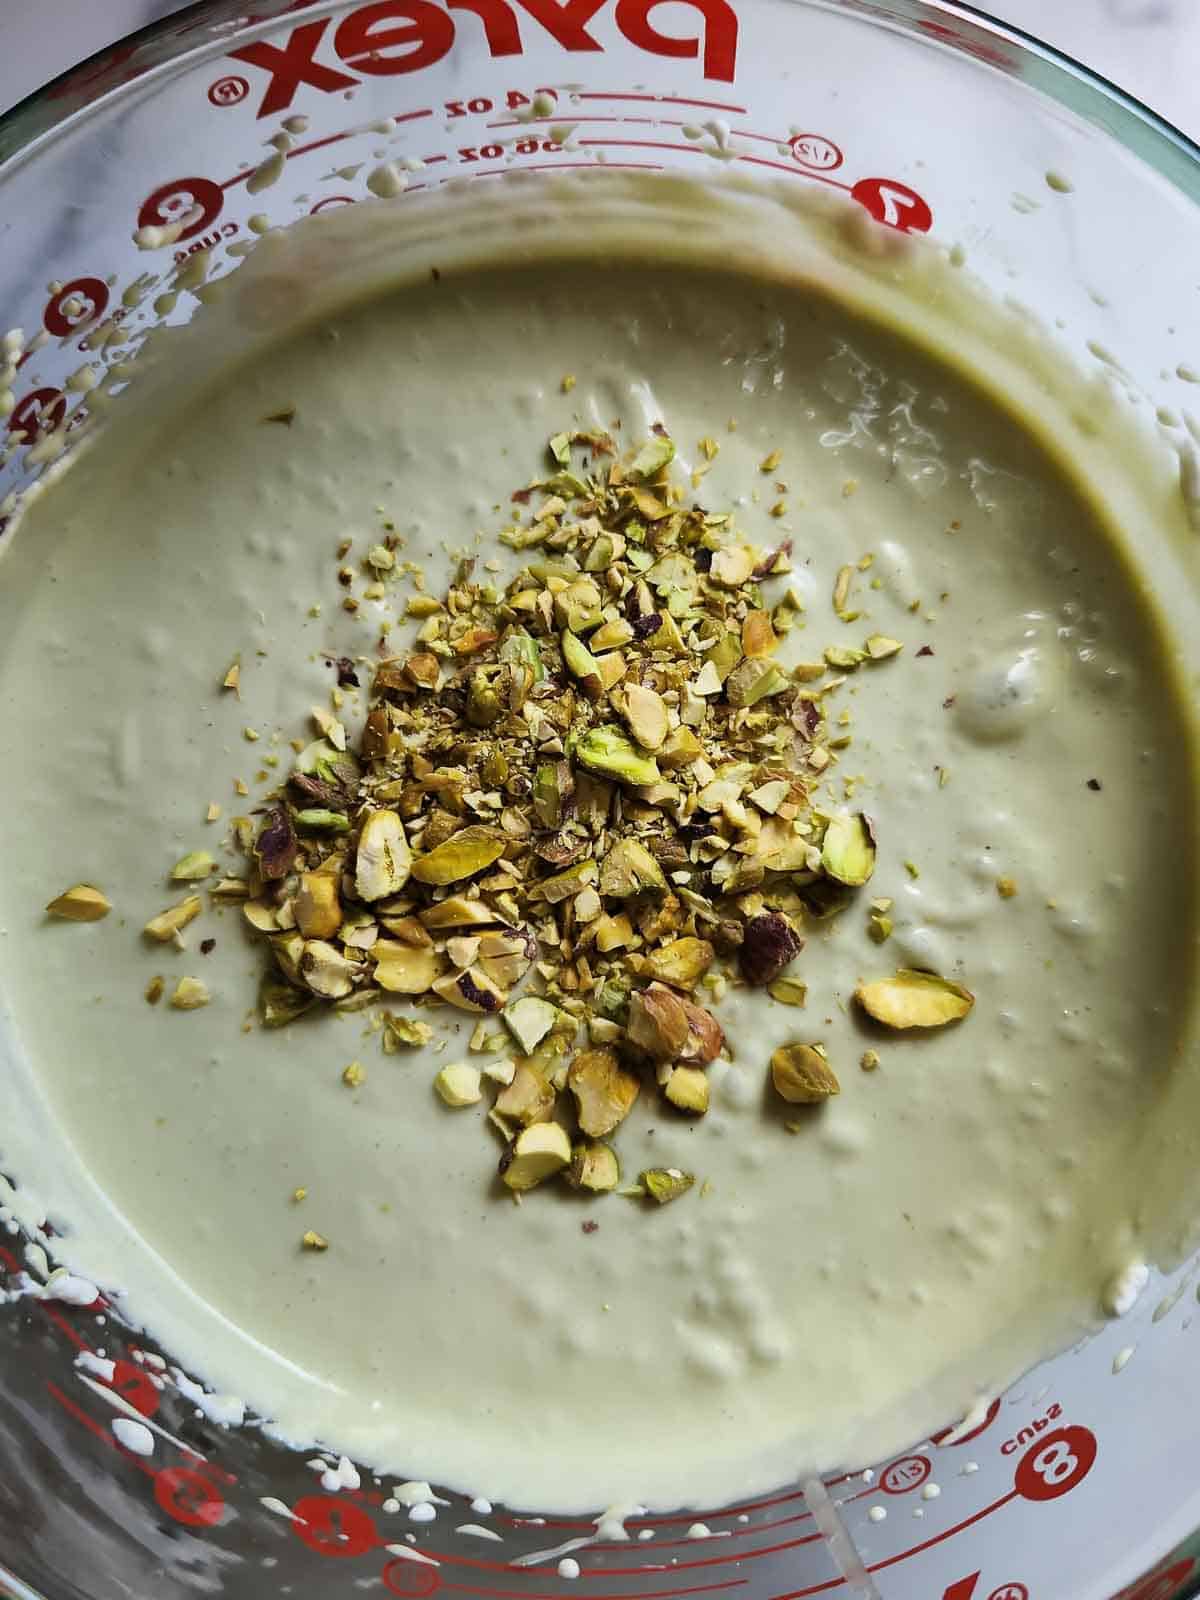 Mixed pistachio ice cream base for home made ice cream in a bowl.